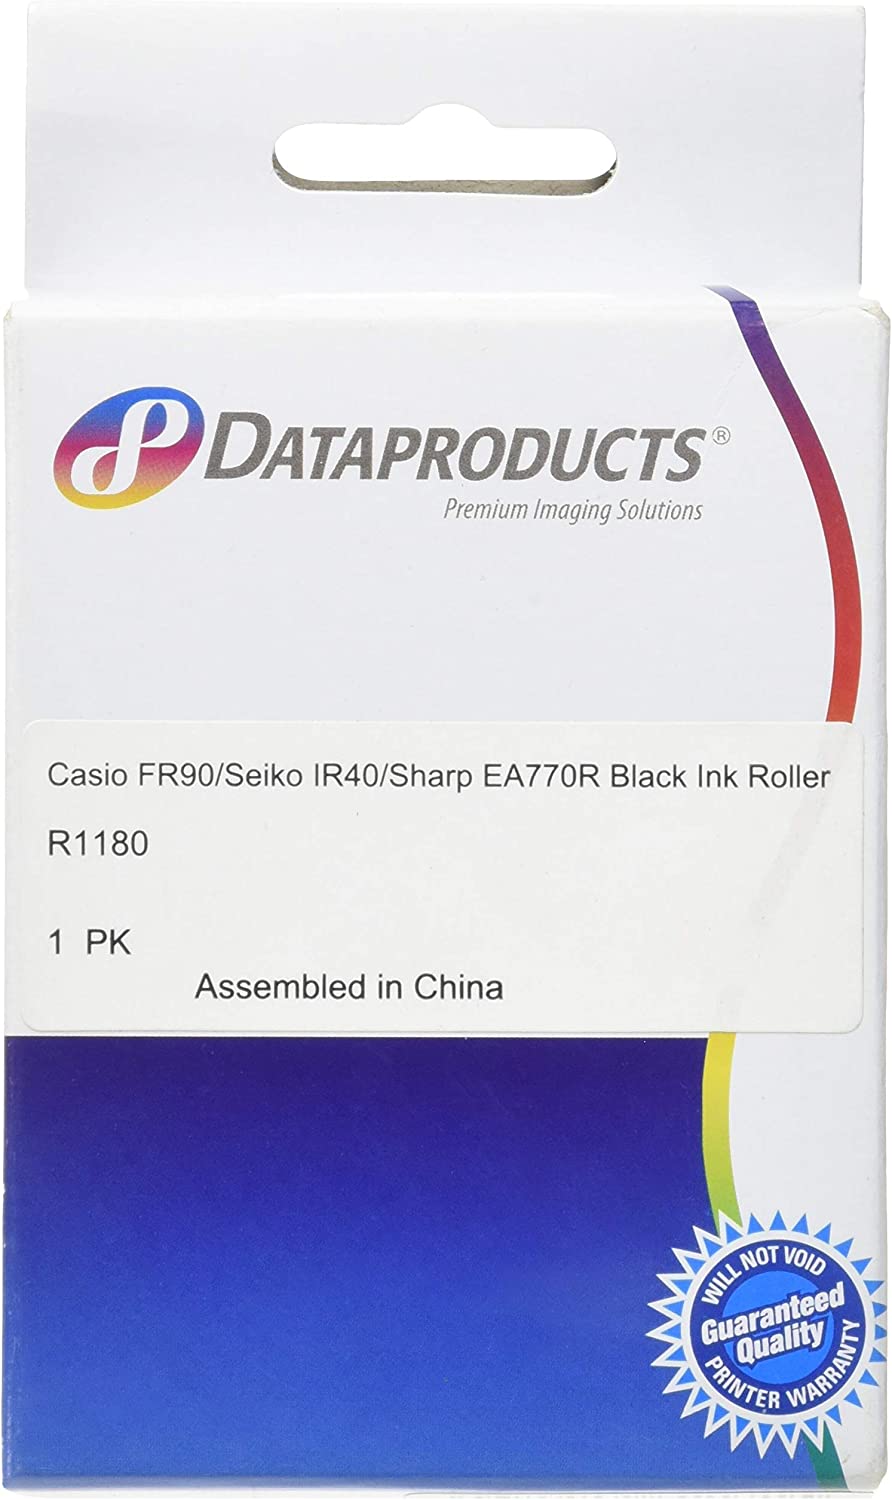 DPSR1180 - Dataproducts R1180 Compatible Ink Roller